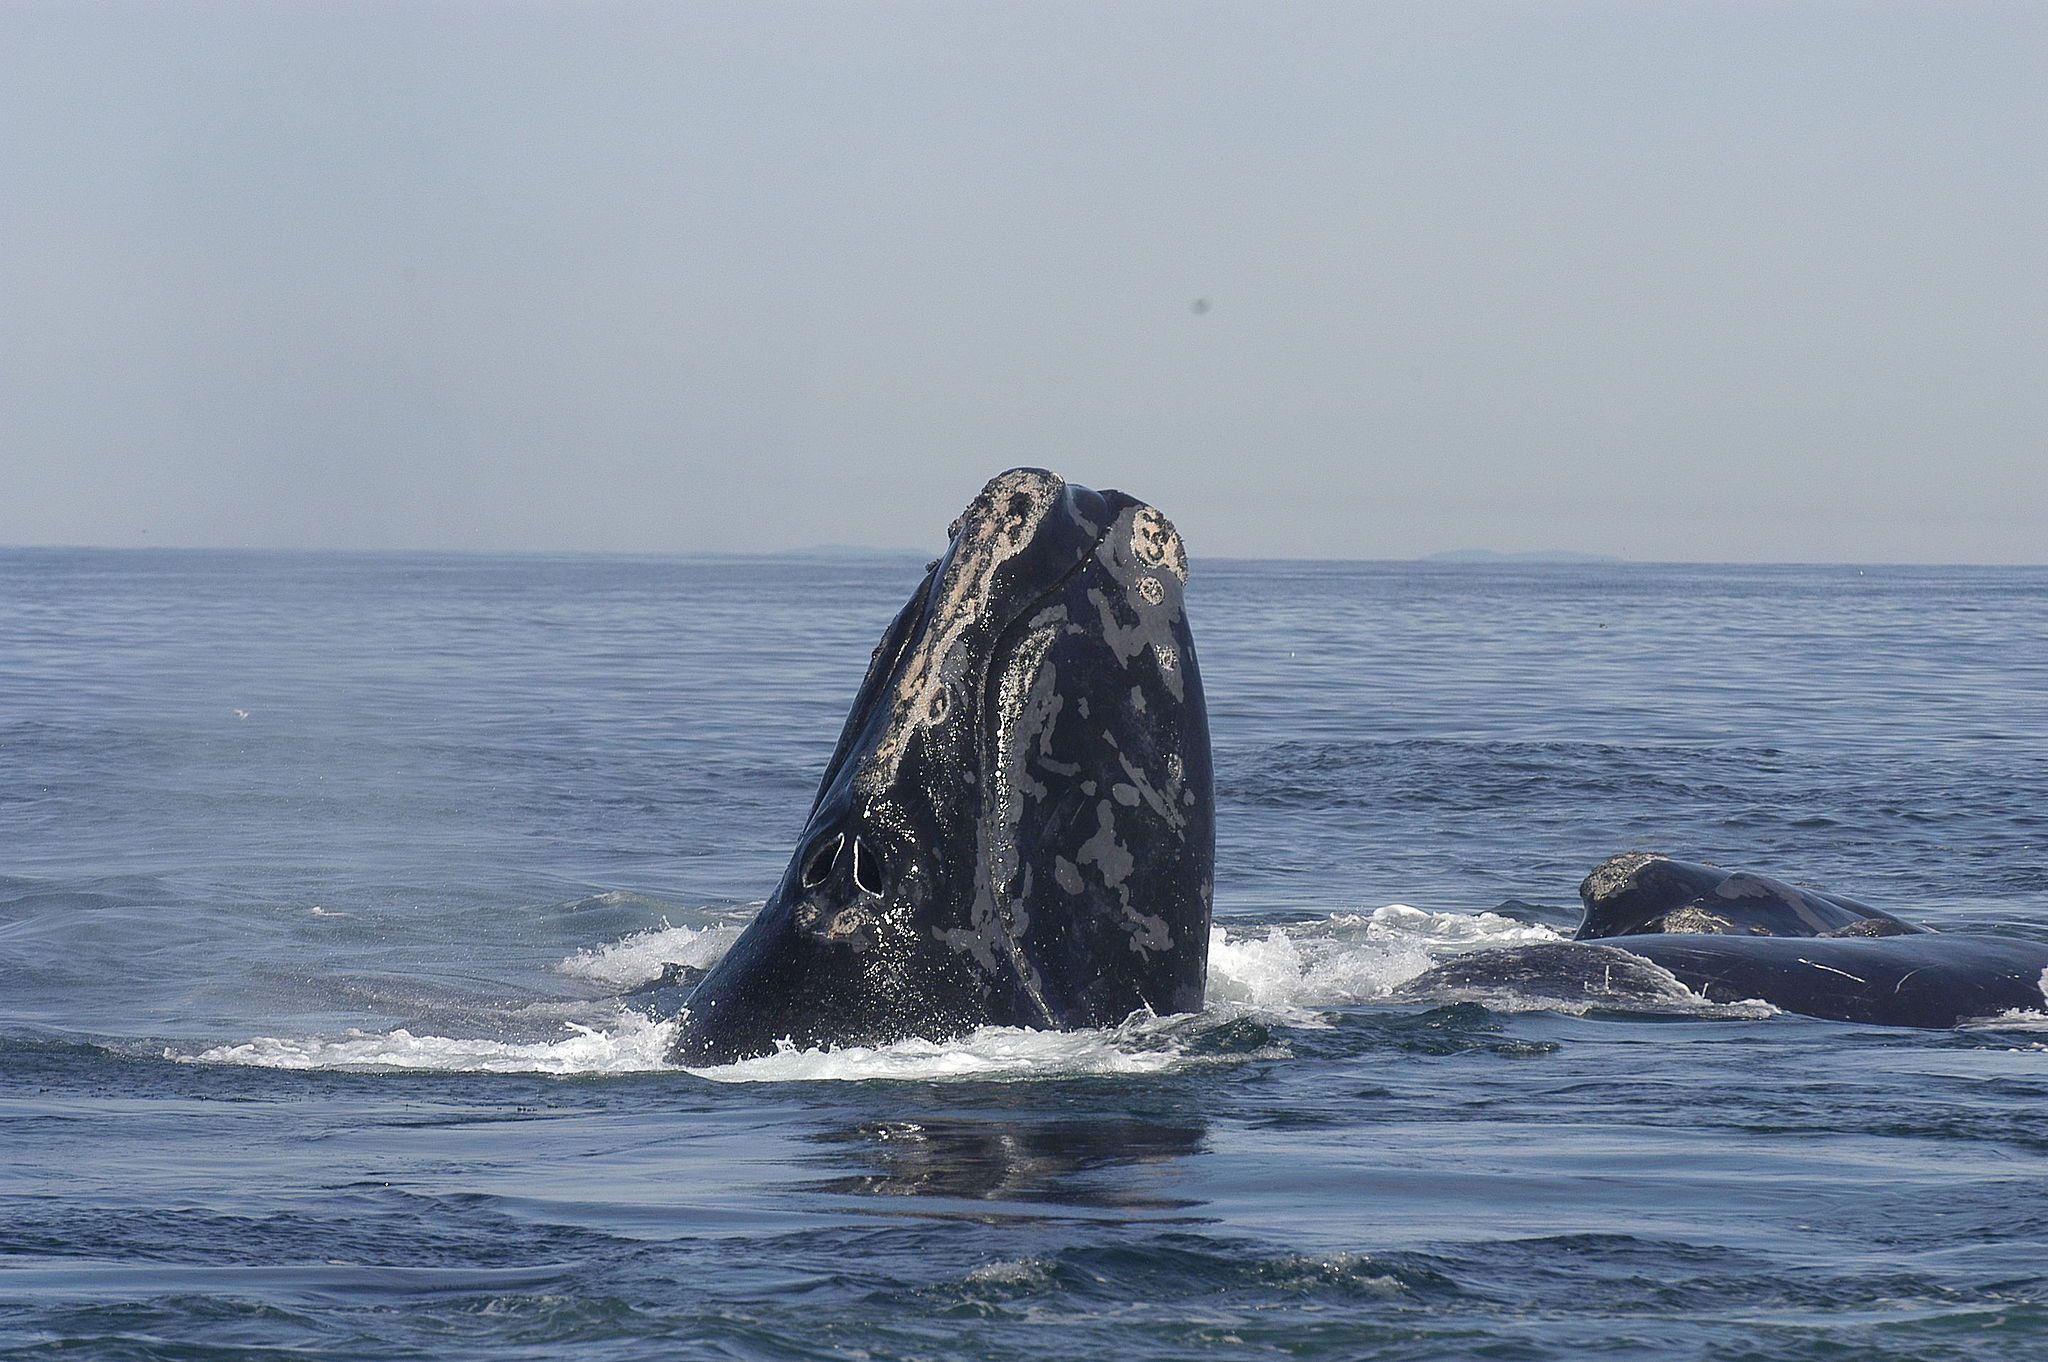 Down to Earth: Right whales feast on the Cape, but for how long?